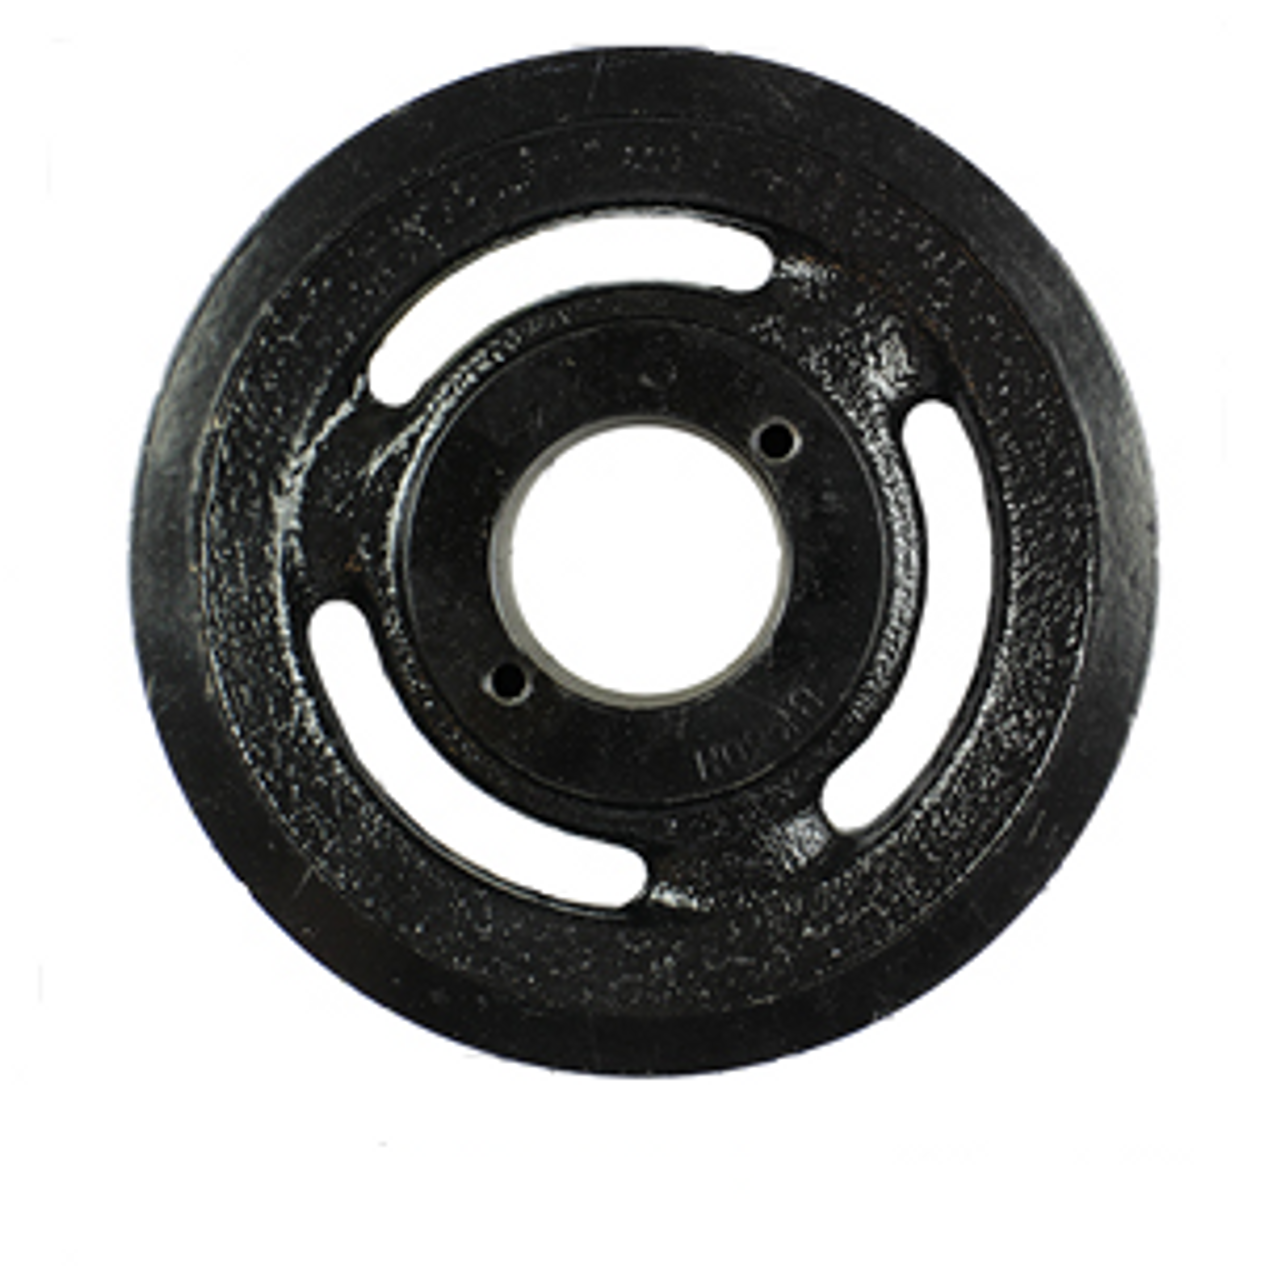 Stens 275-945 Heavy Duty Cast Iron Pulley